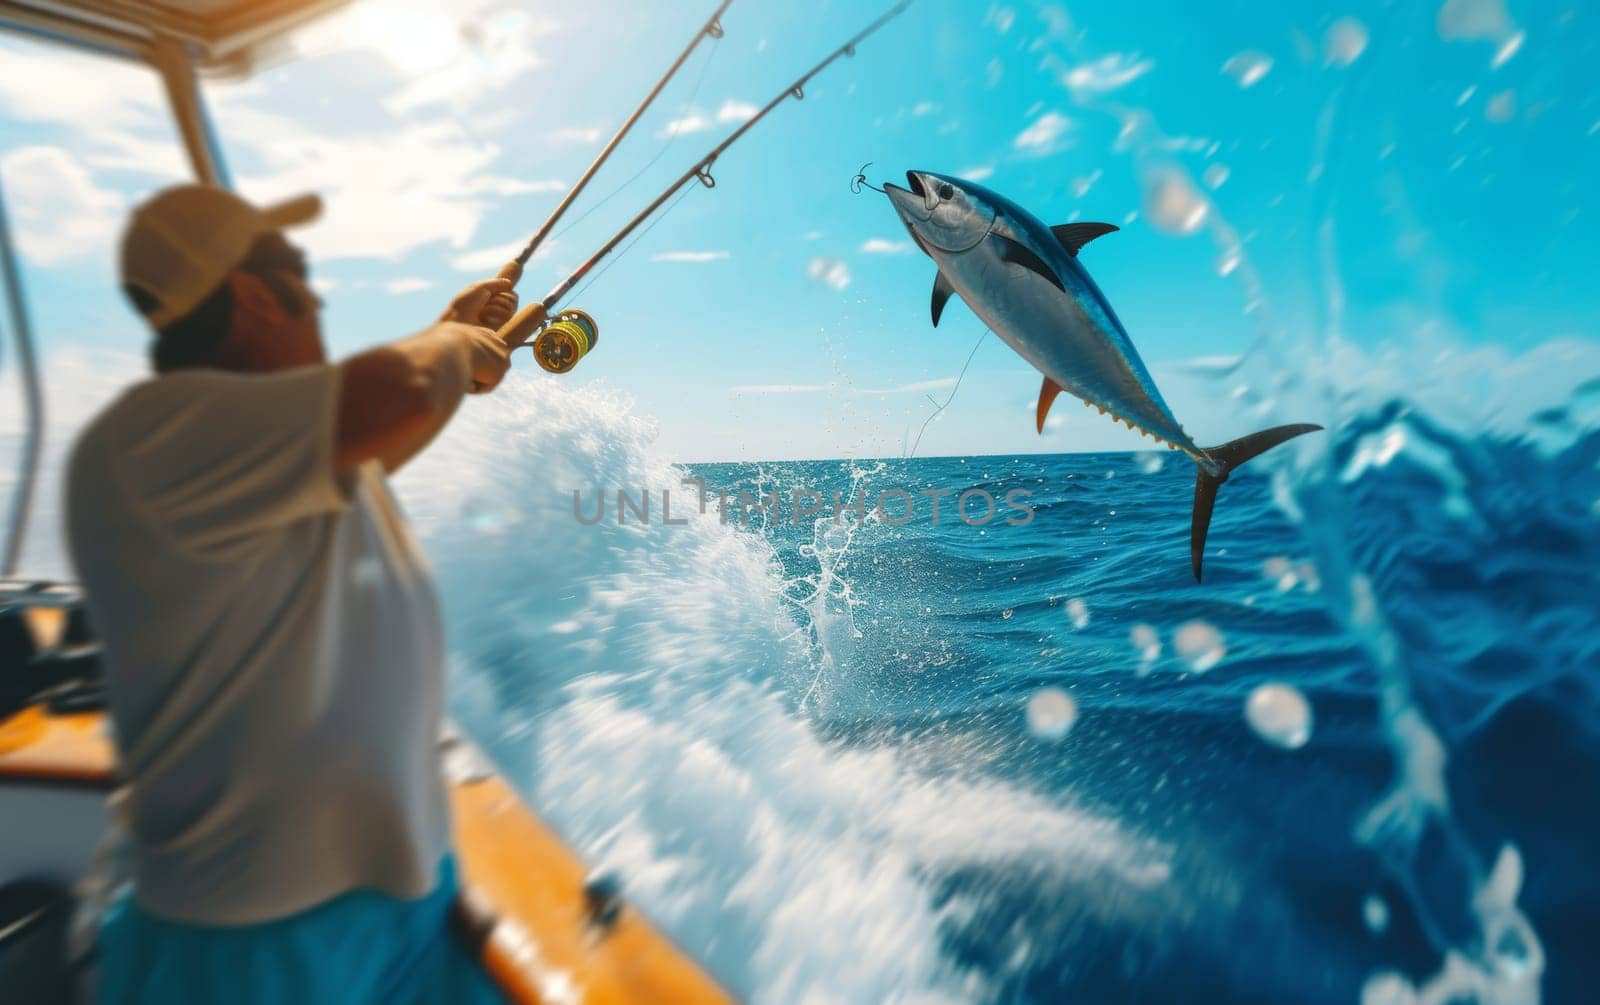 An adventurous man on a yacht skillfully reels in a big tuna, capturing the thrill and excitement of deep-sea fishing